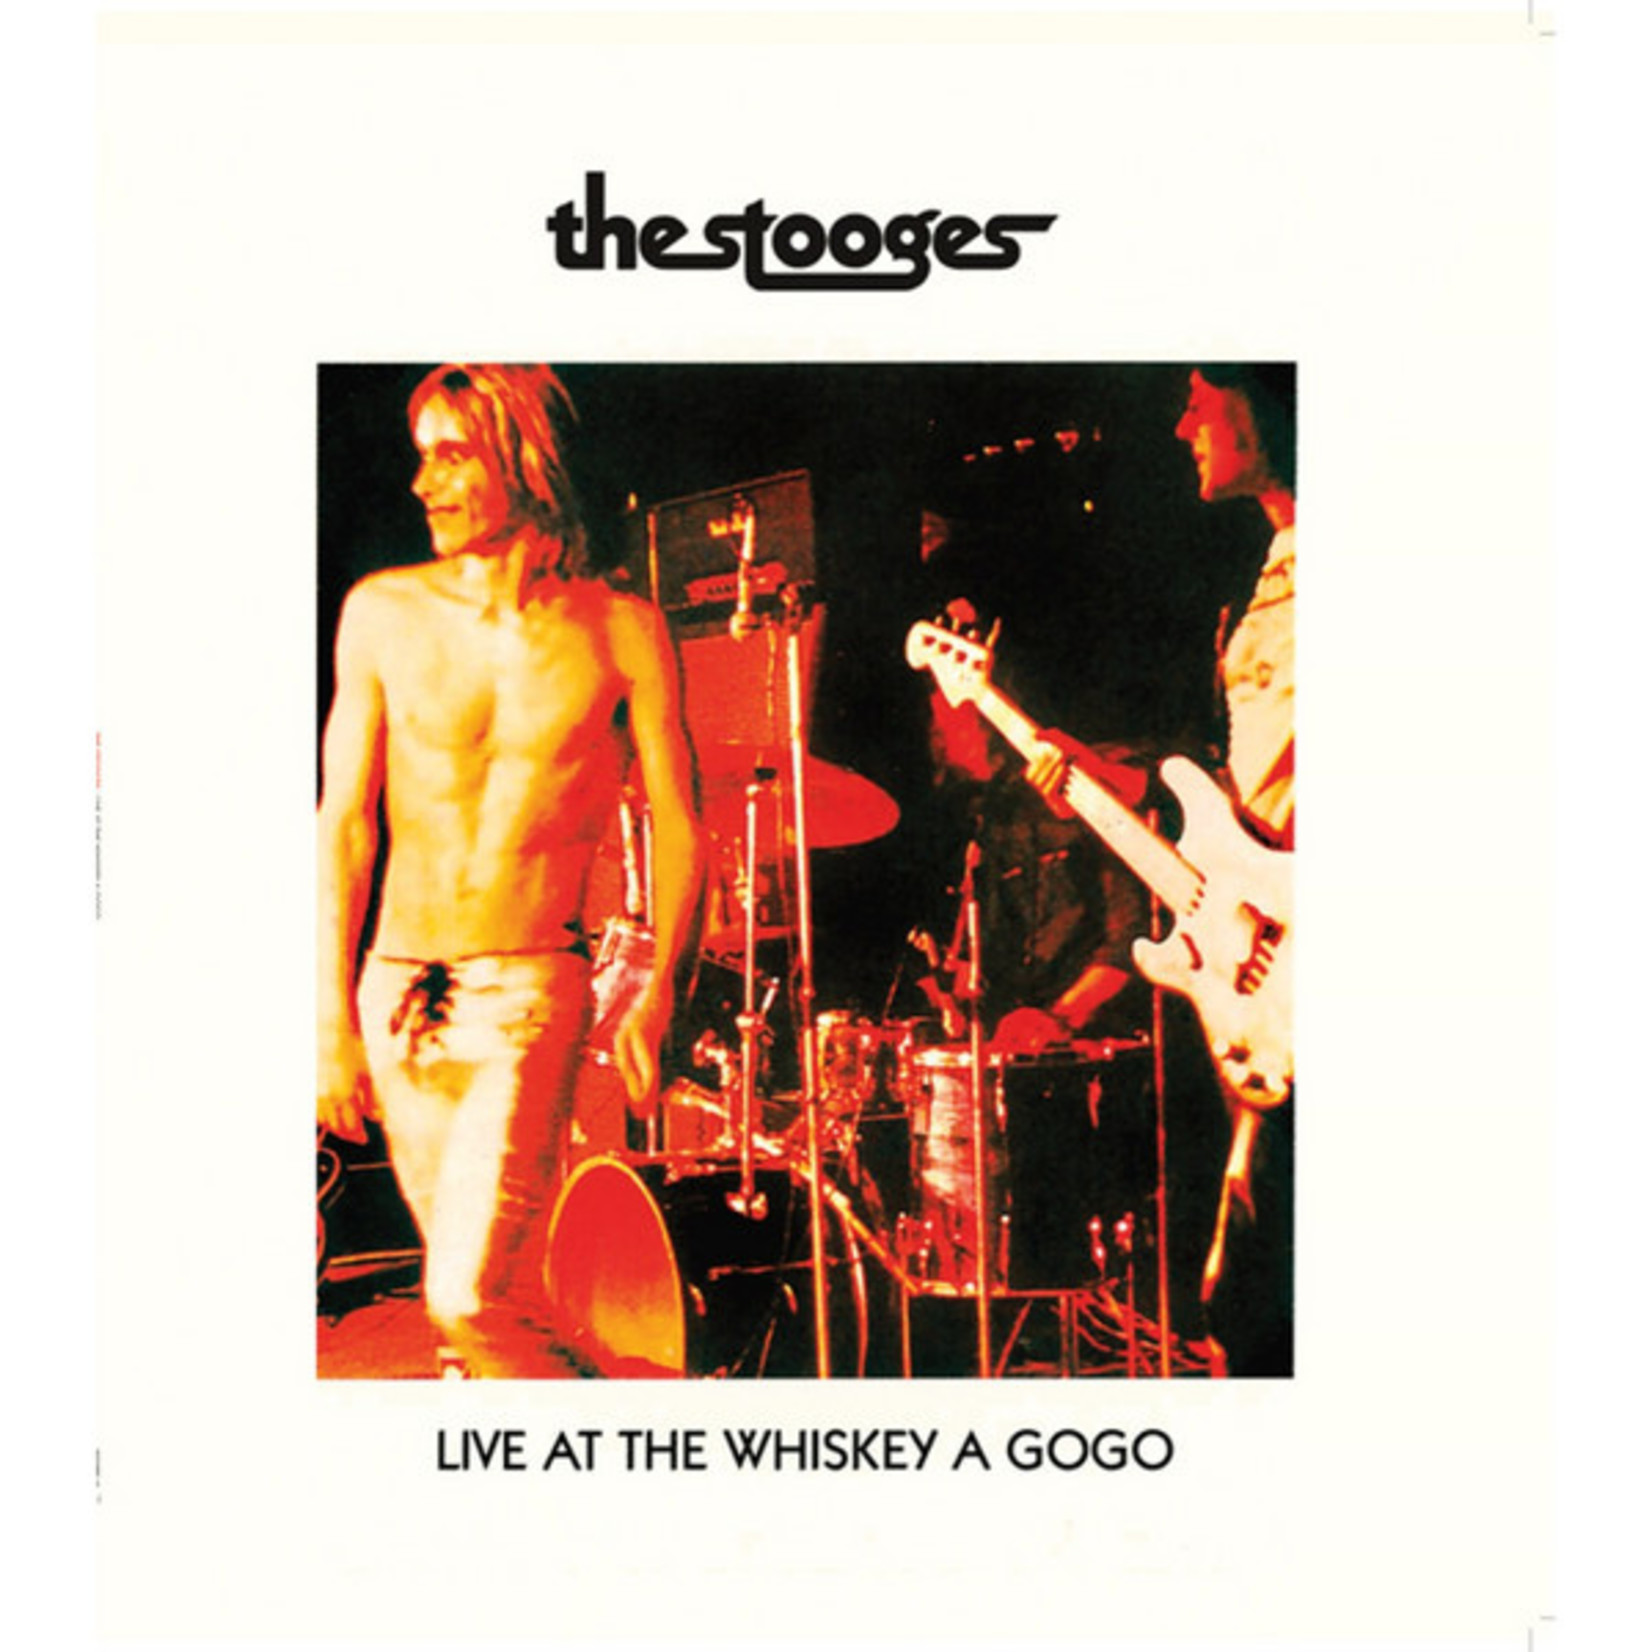 The Stooges – Live At The Whiskey A Gogo